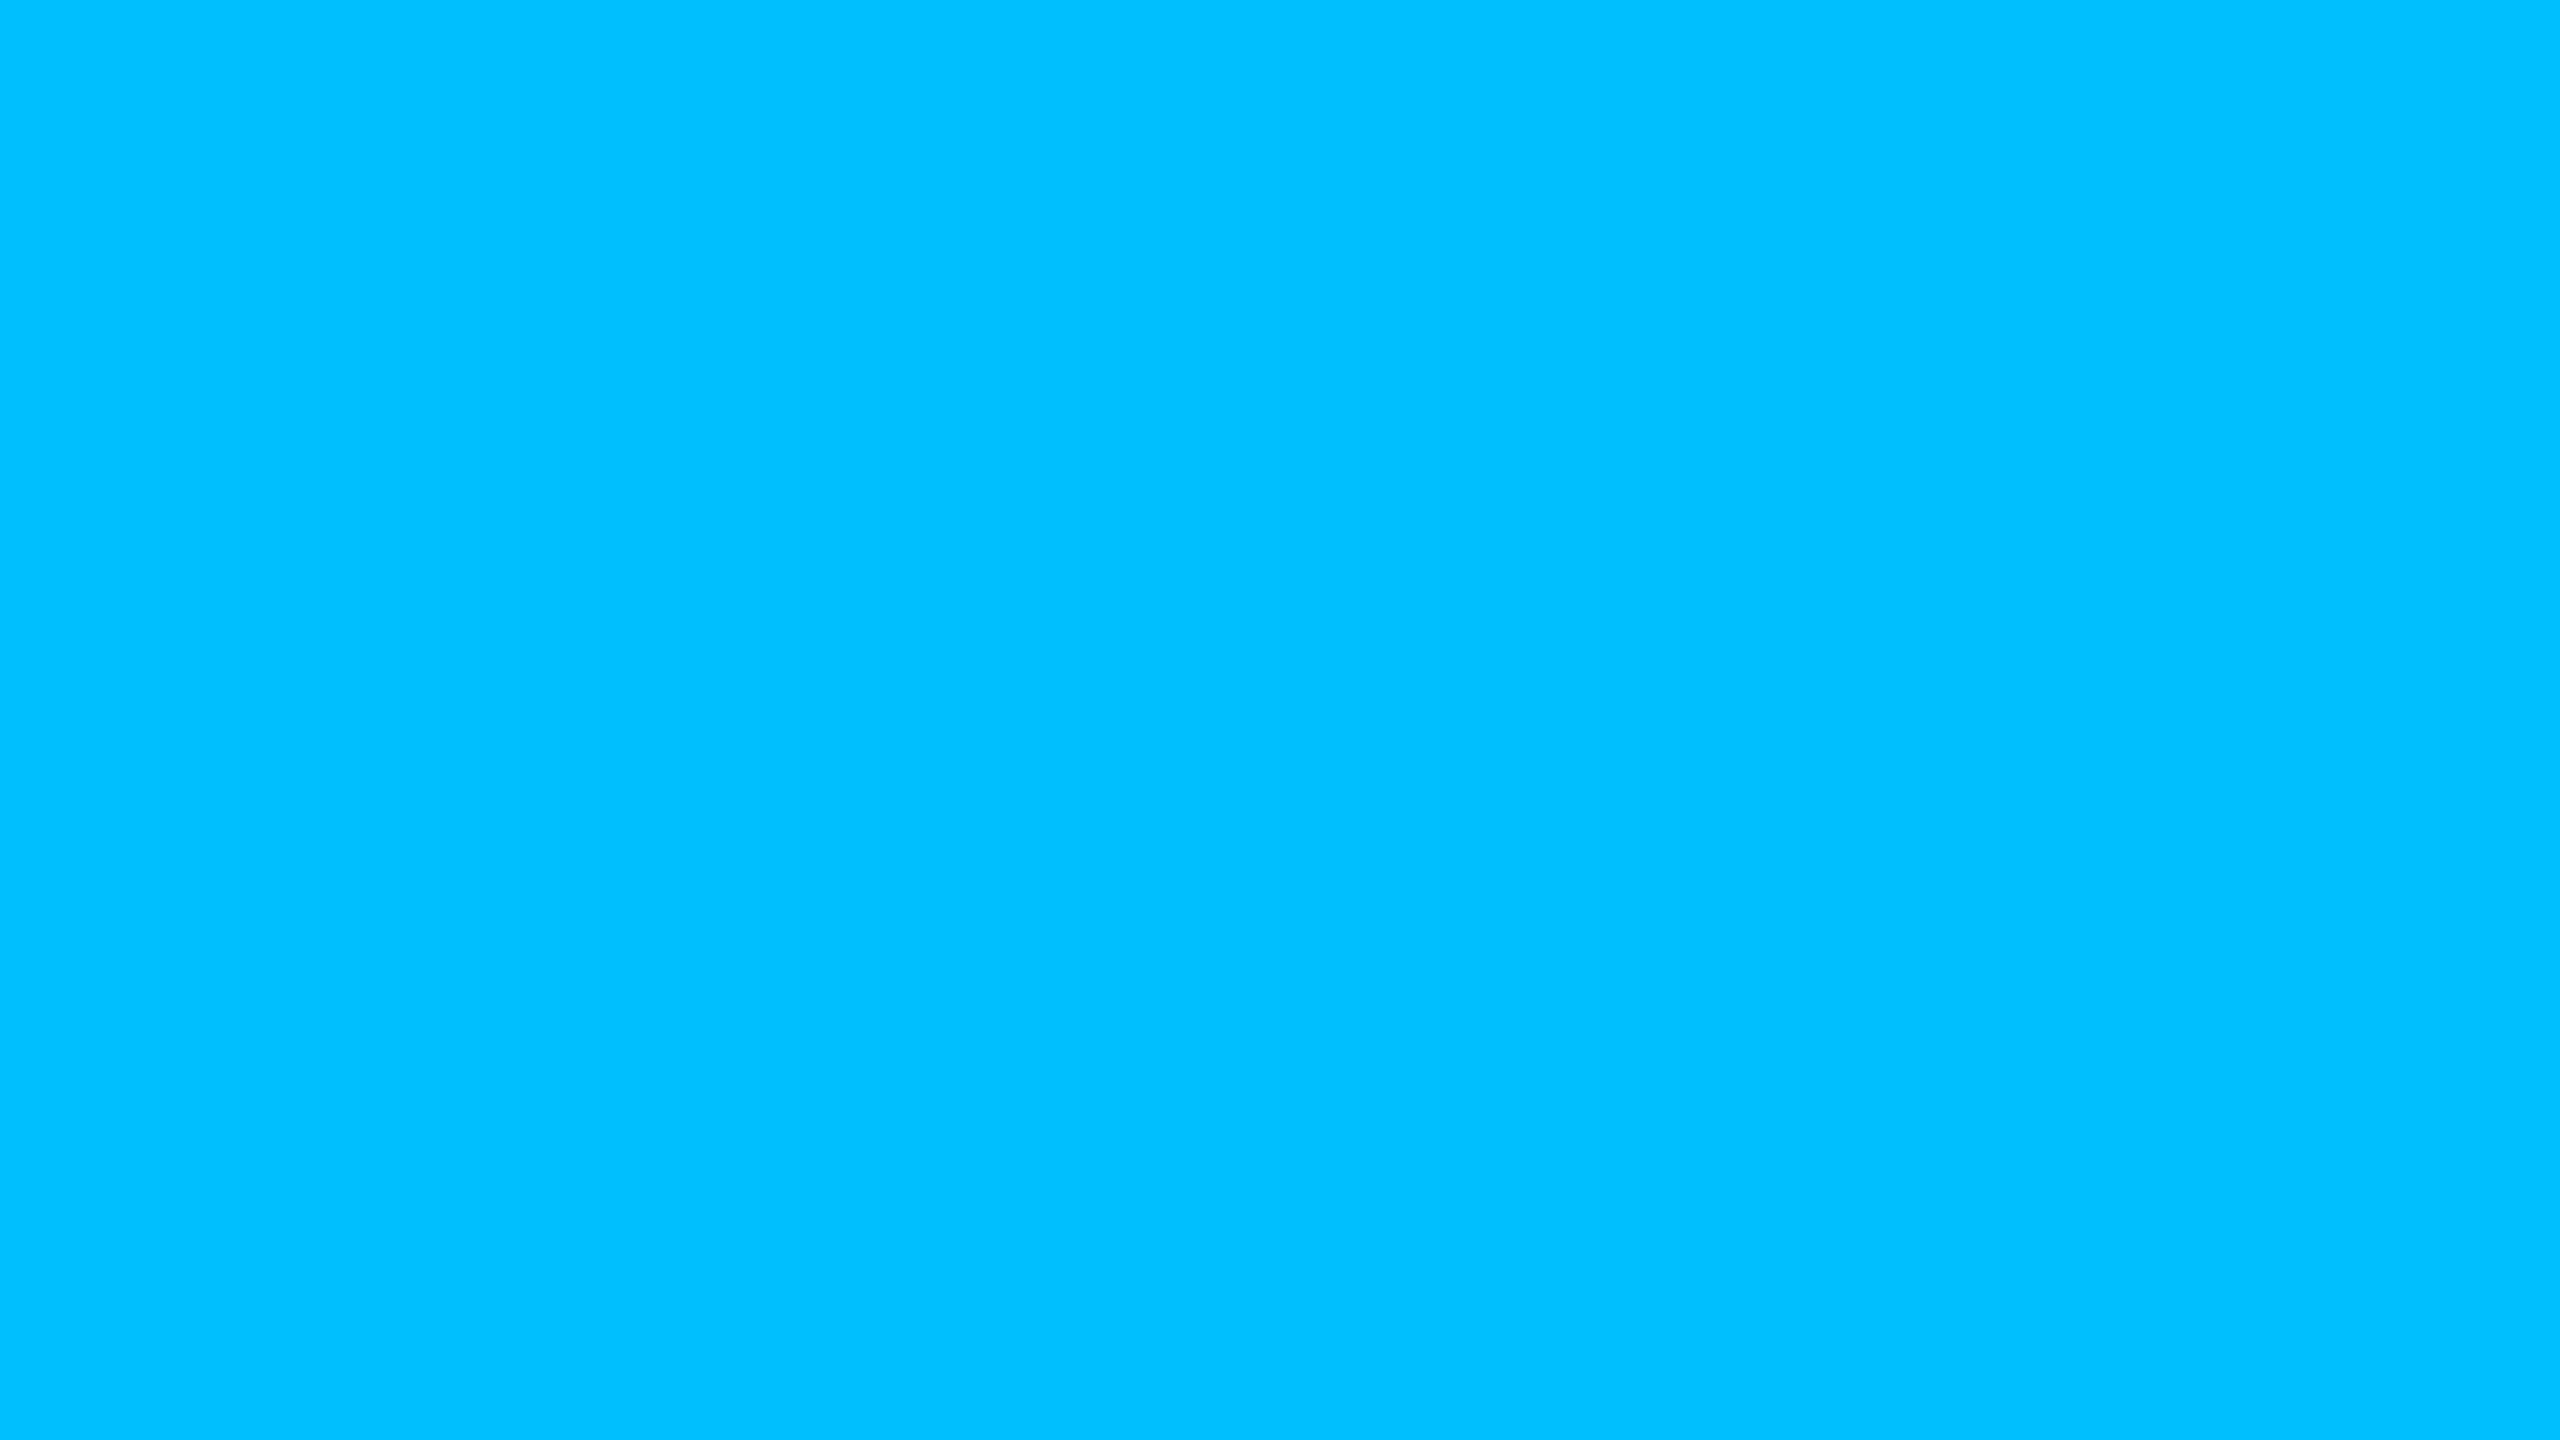 Sky Blue Background - High-Quality Images and Ideas